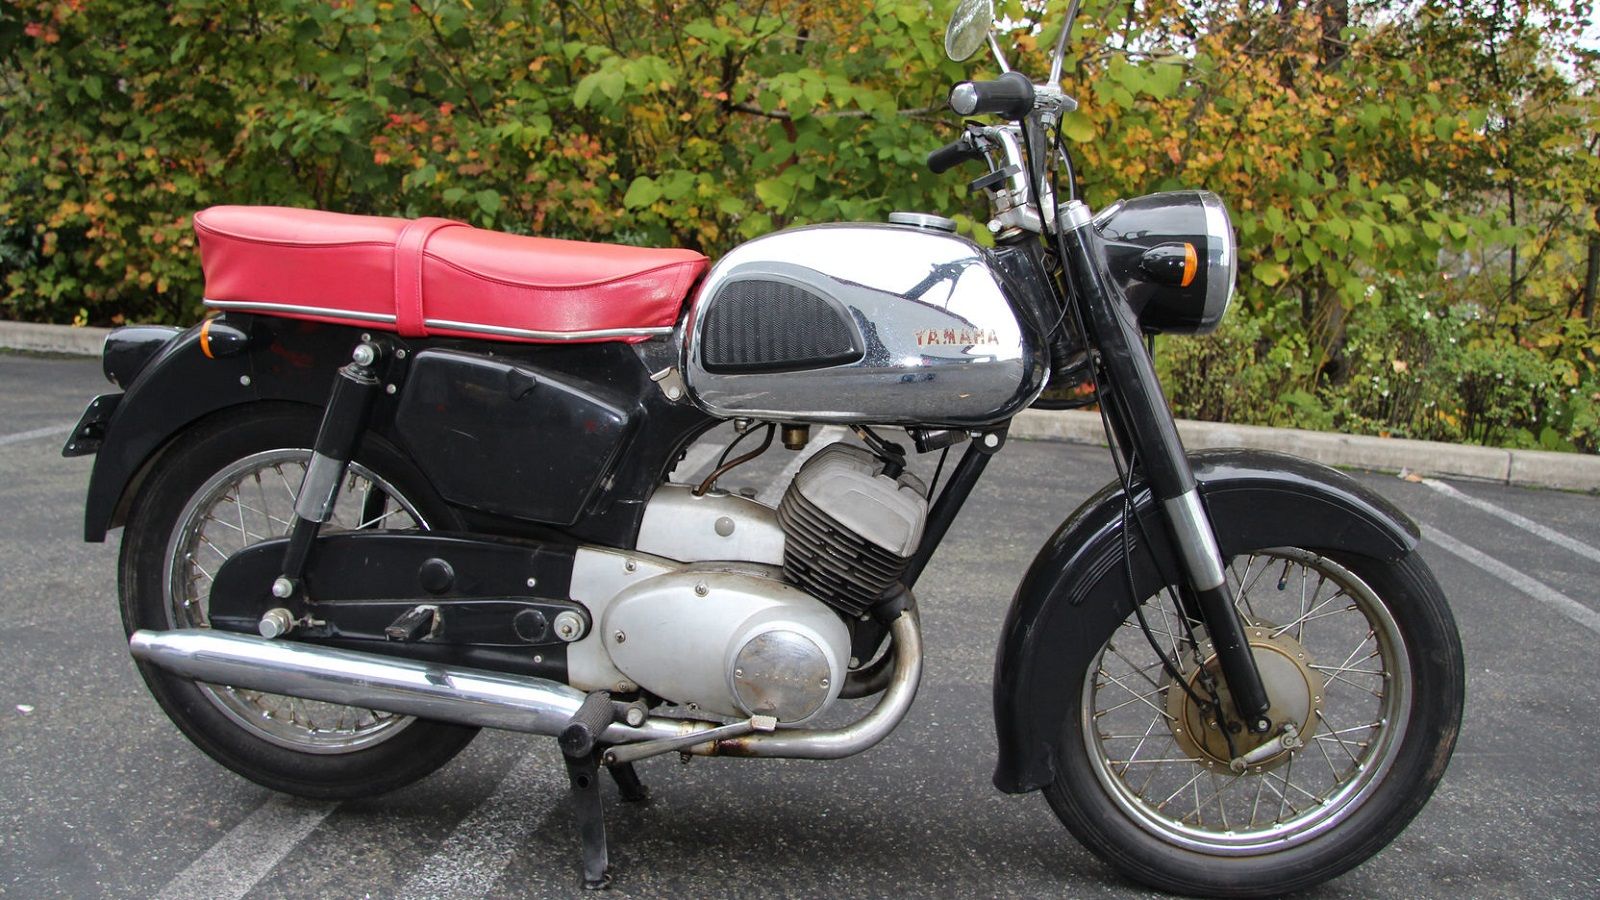 A parked 1959 Yamaha YD2